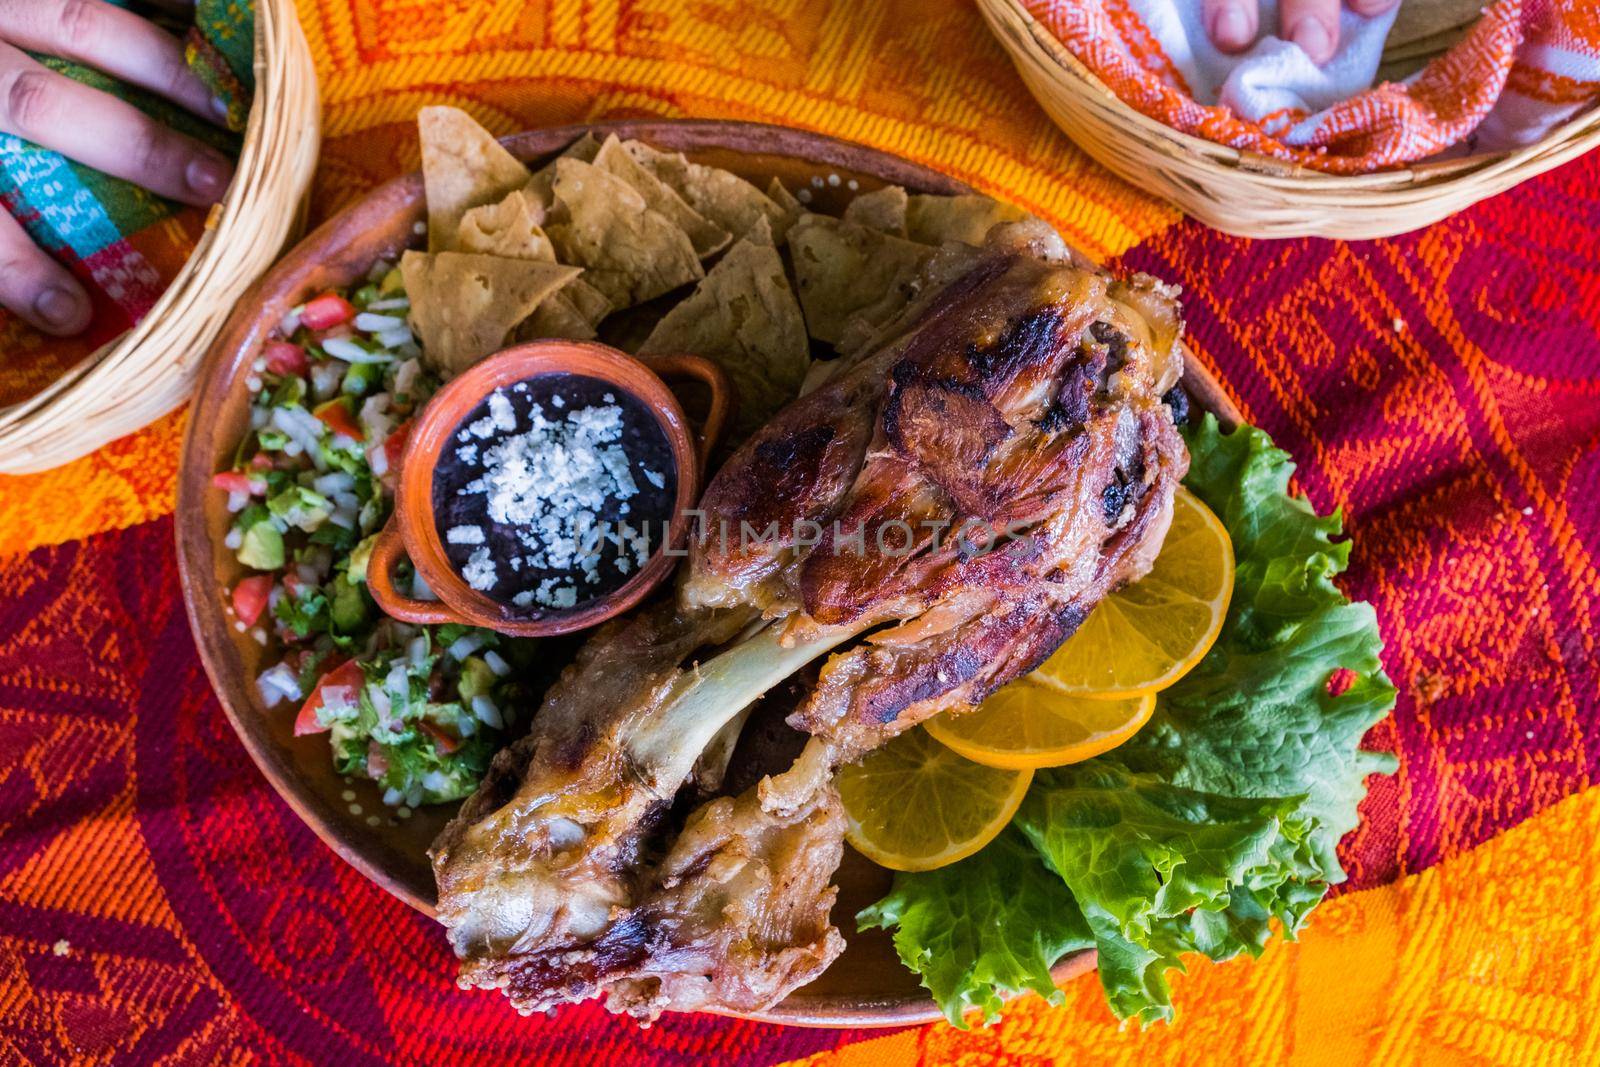 Top view of delicious roasted pork with lemon slices, lettuce, tortilla chips, and refried beans on colorful tablecloth. Tasty meat and accompaniments above orange and red table. Mexican style meal